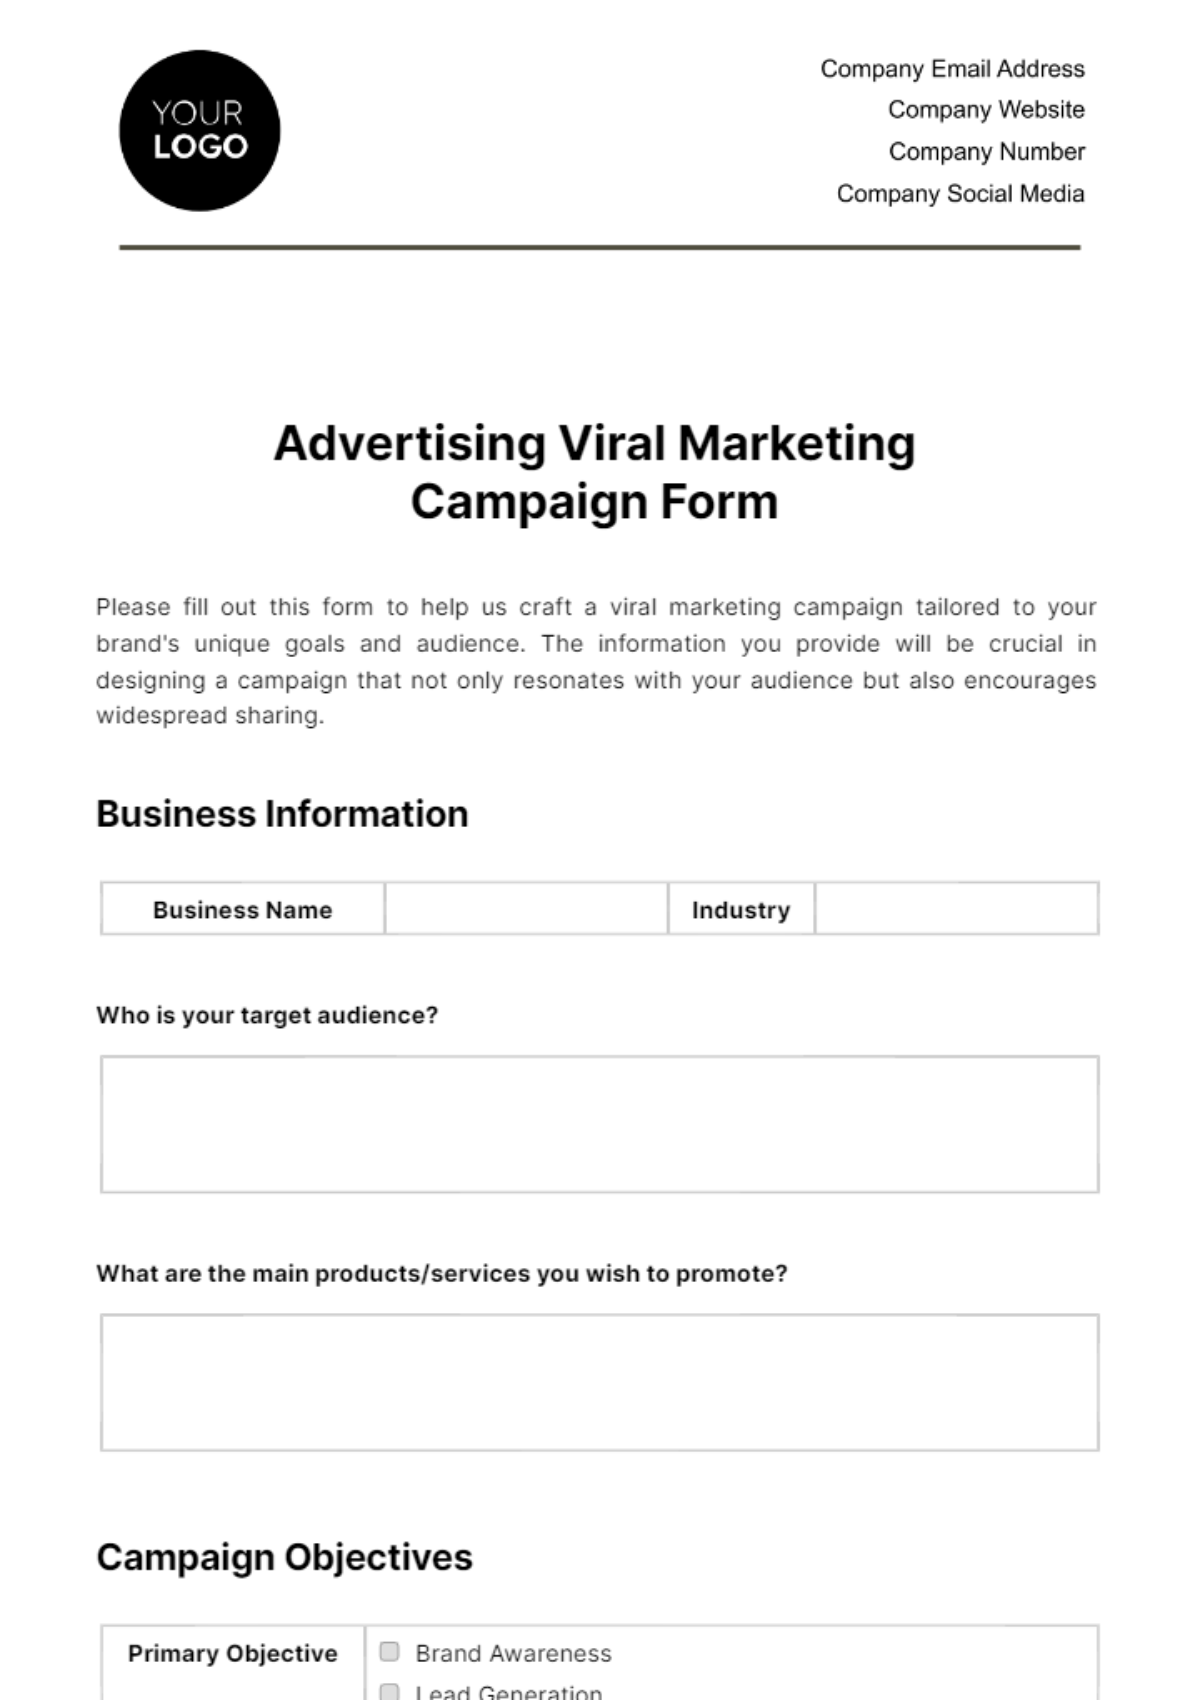 Advertising Viral Marketing Campaign Form Template